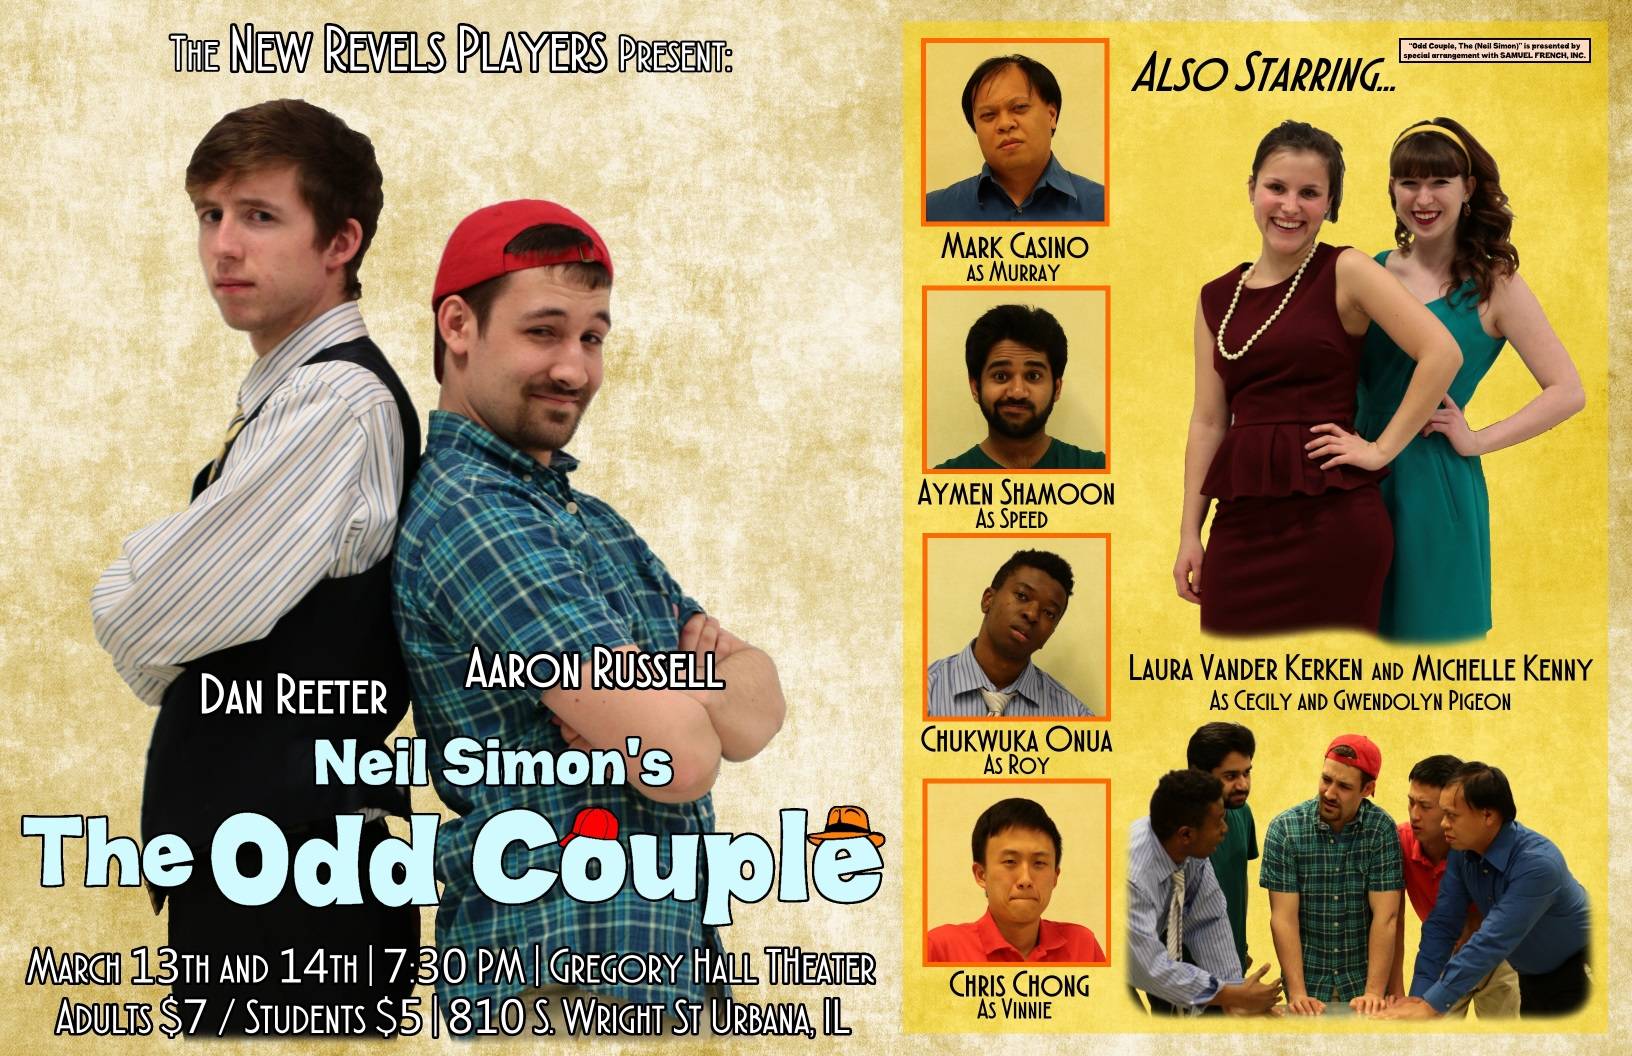 The Odd Couple coming to campus March 13th and 14th